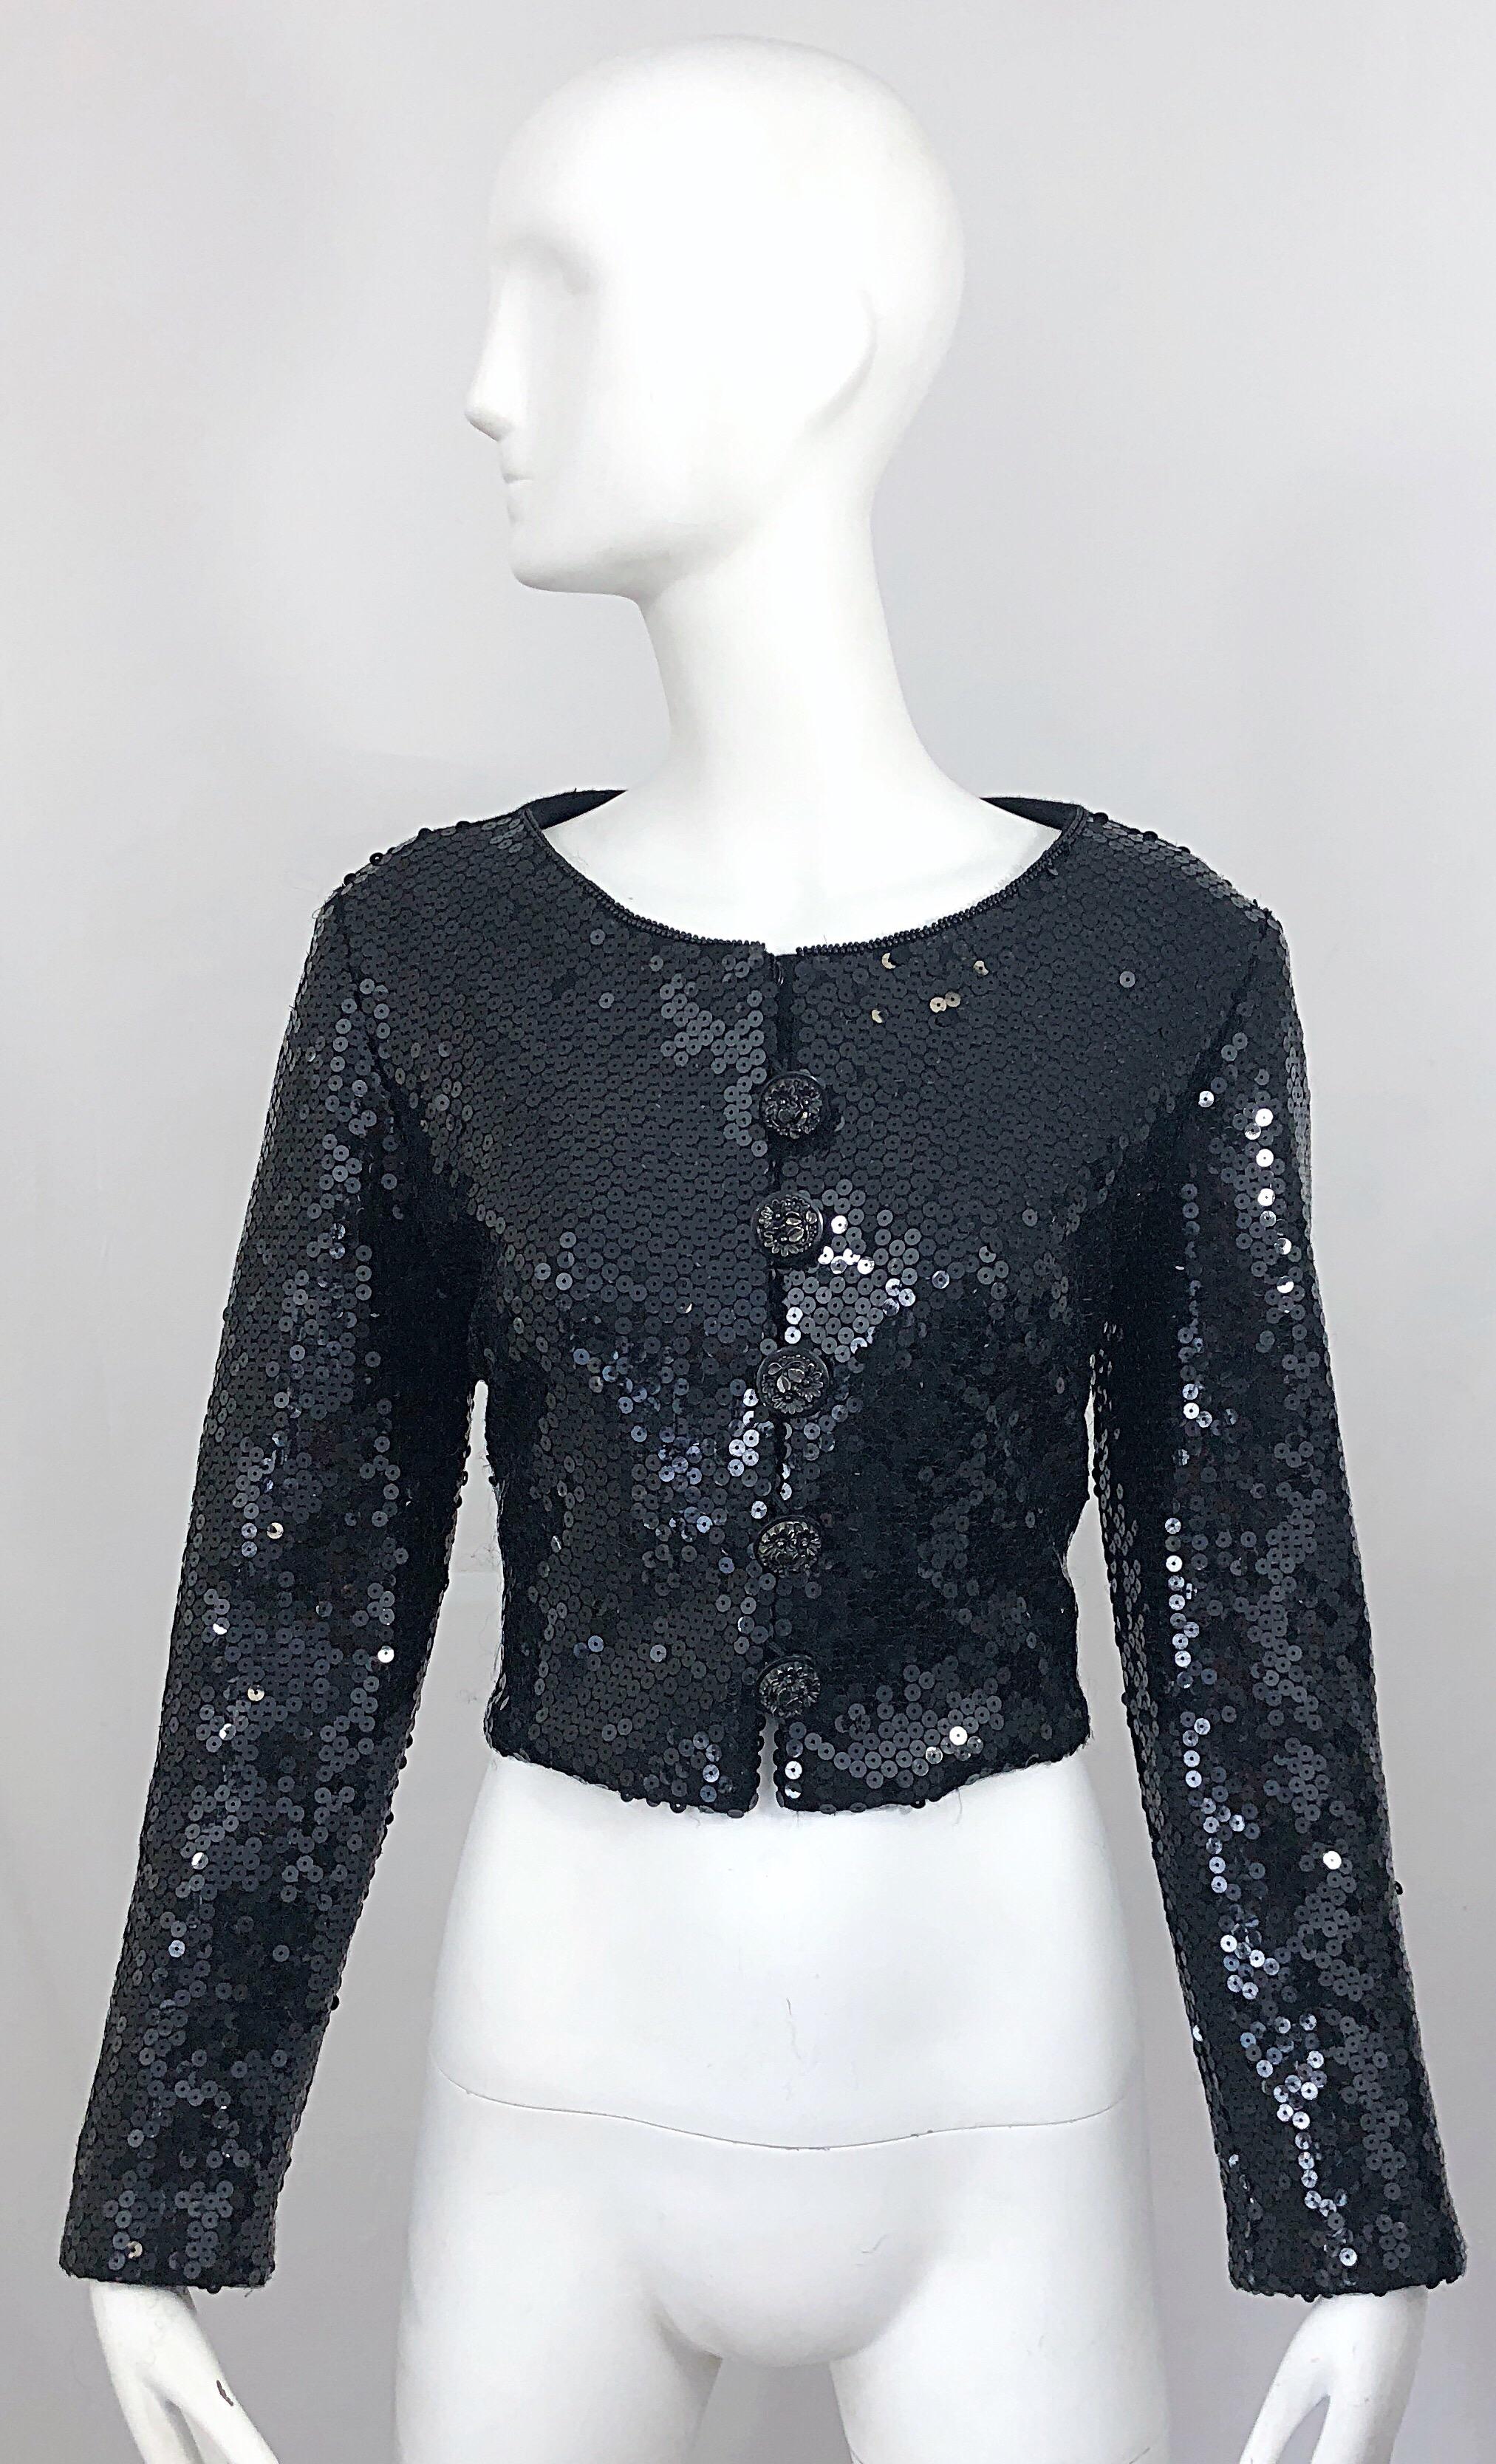 Chic 1990s GEMMA KHANG black sequined wool crop jacket. Features thousands of hand-sewn black sequins throughout. Large silver /gunmetal nickel flower etched buttons up the front. Black seed beads along the collar. Soft wool back. Perfect smartly